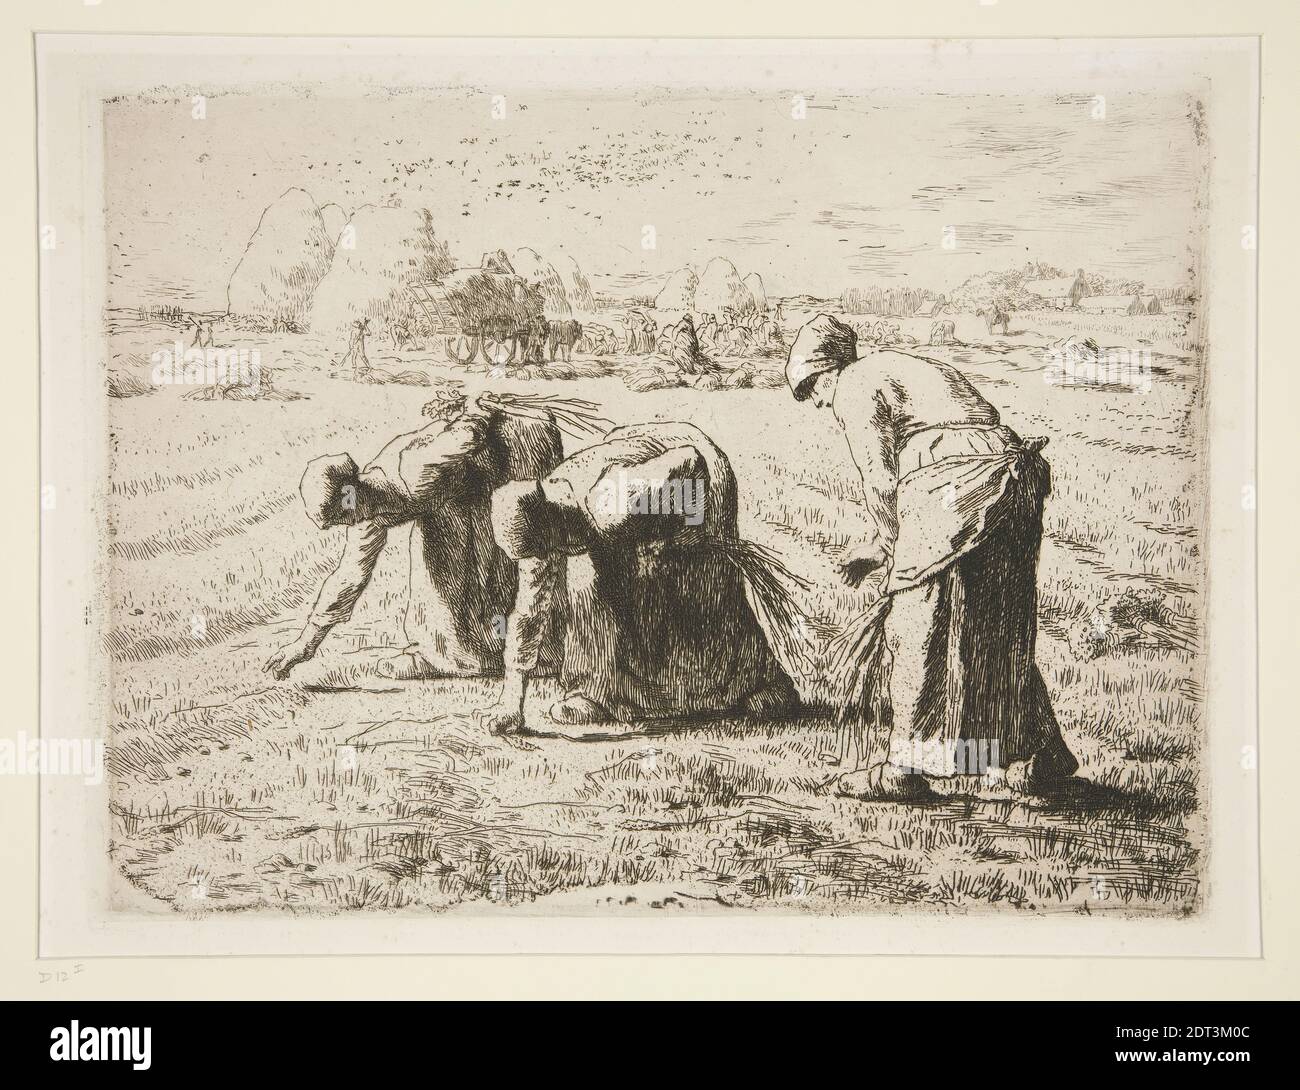 Artist: Jean-François Millet, French, 1814–1875, Les Glaneuses (The  Gleaners), Etching with chine collé, 19.2 × 25.2 cm (7 9/16 × 9 15/16 in.),  Made in France, French, 19th century, Works on Paper - Prints Stock Photo -  Alamy